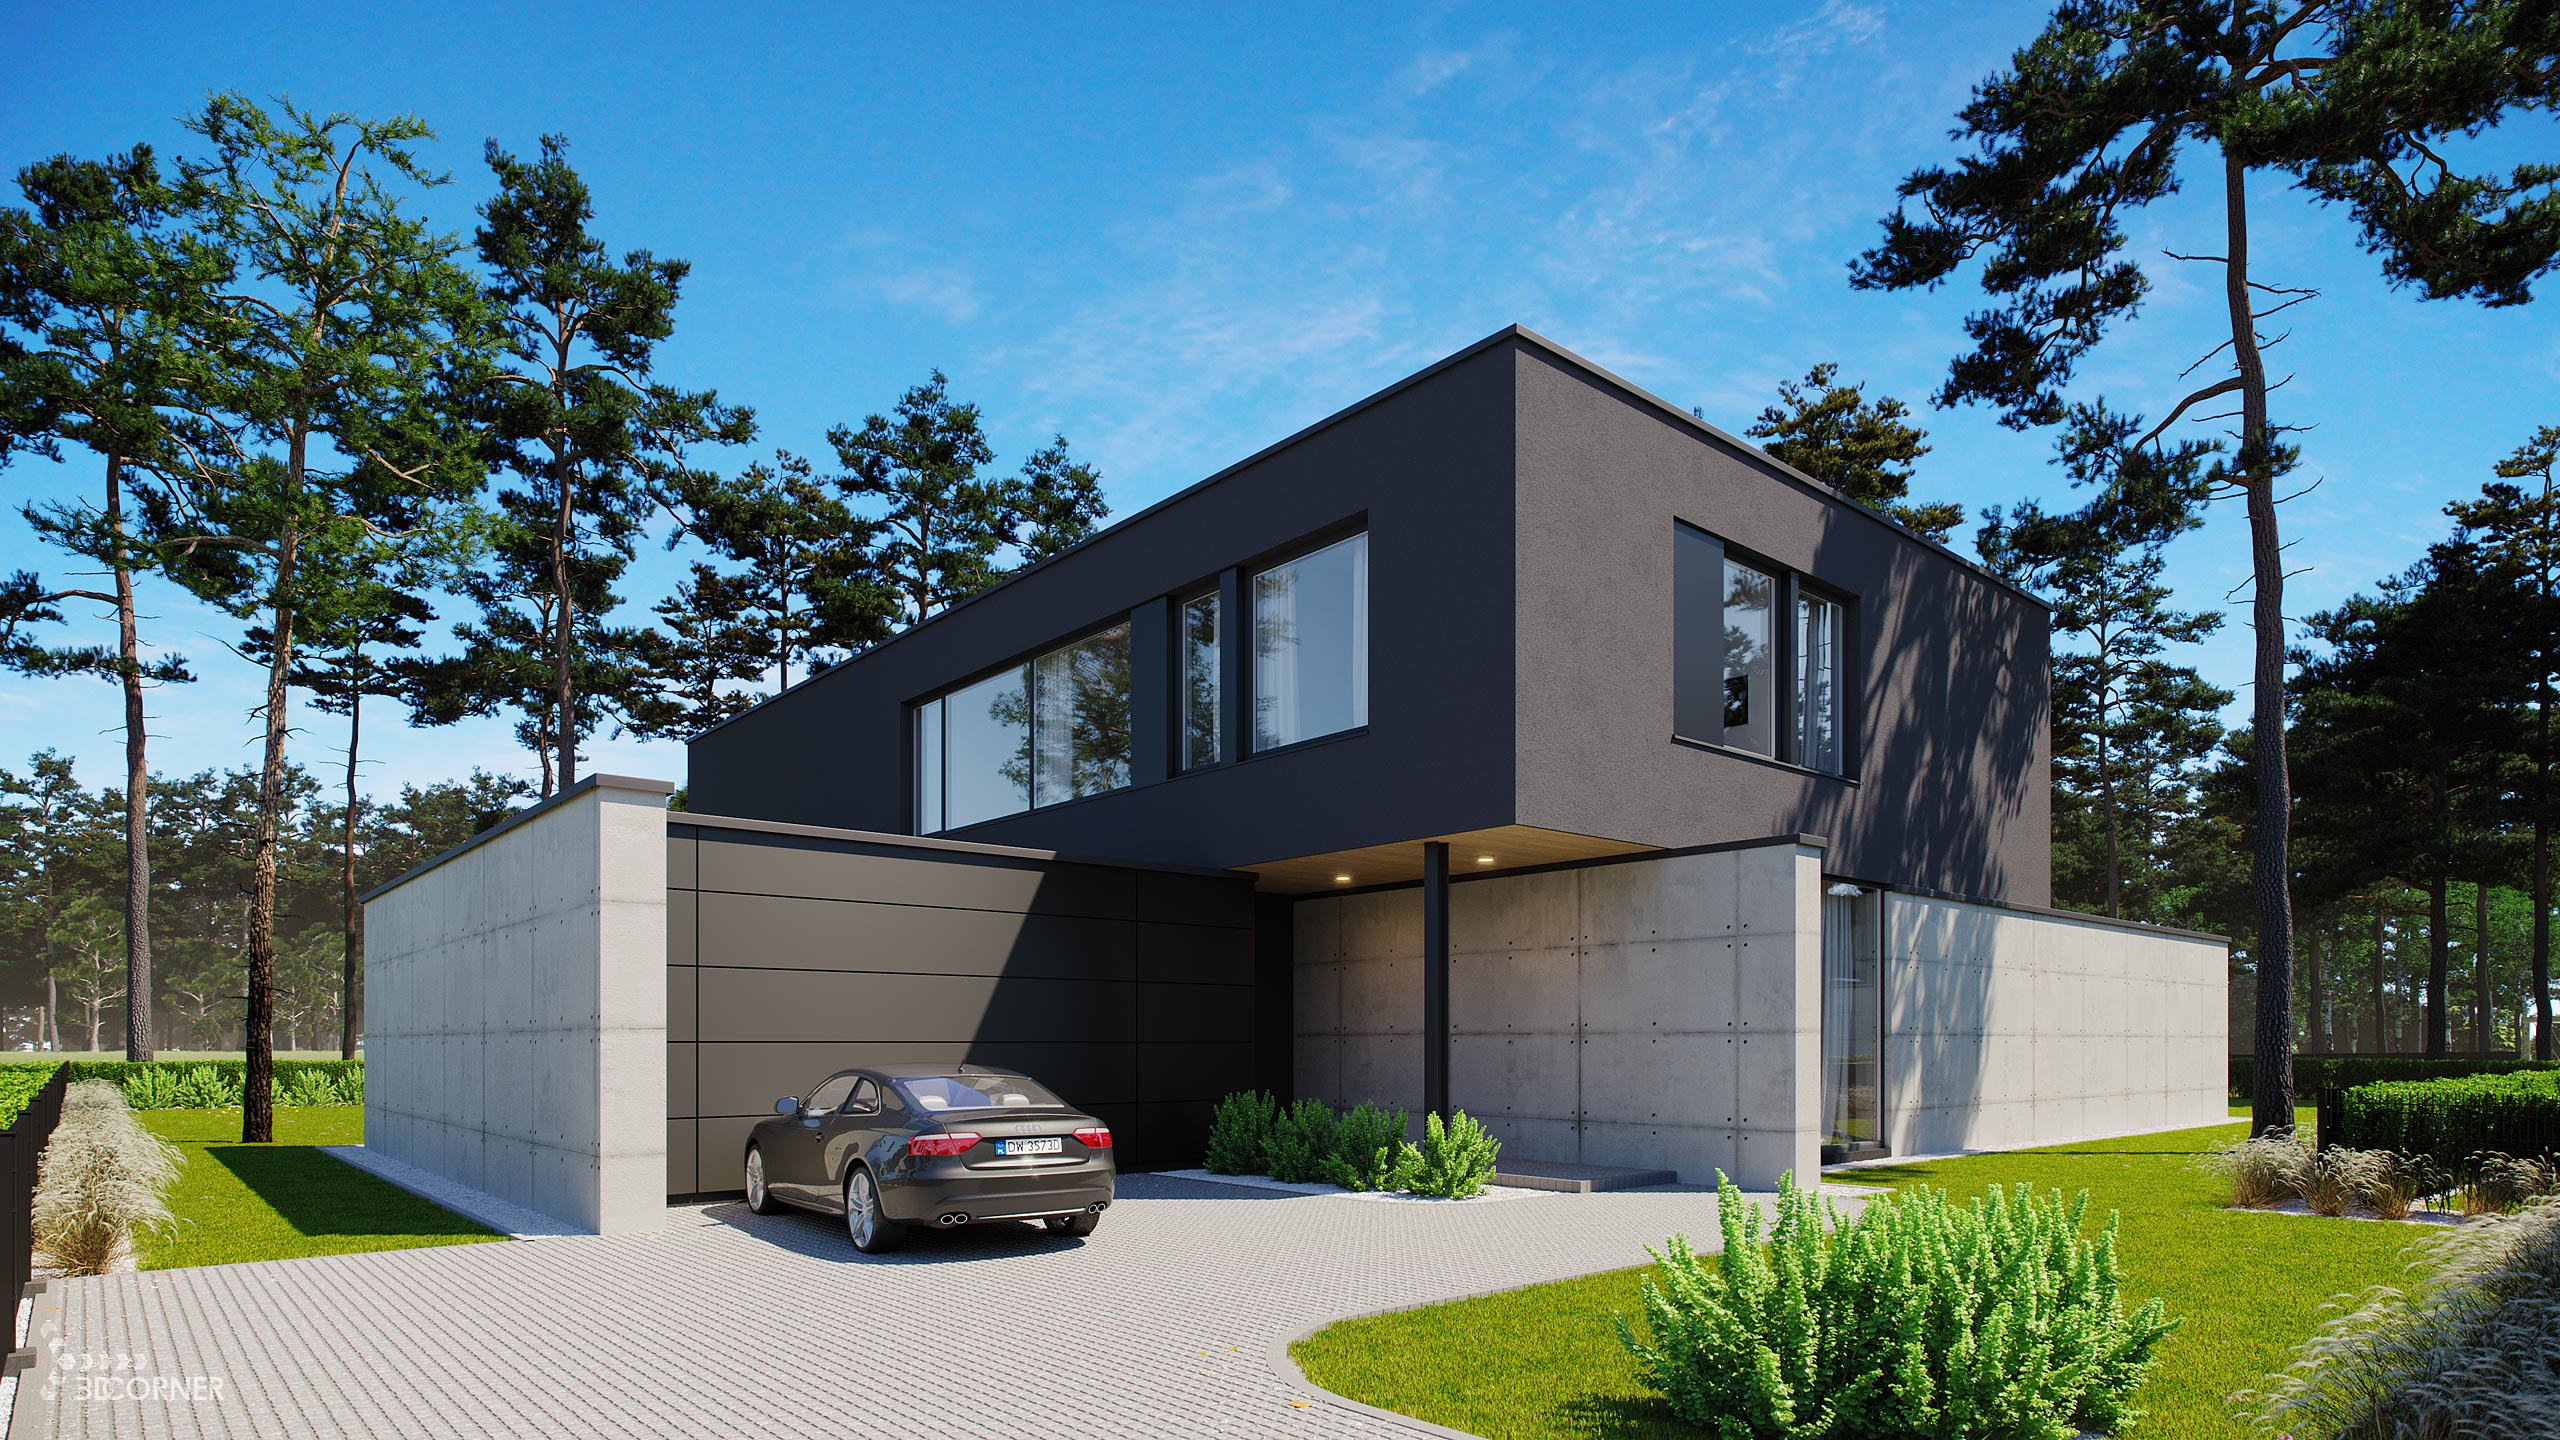 Exterior architecture visualization of modern residential houses by 3D Corner.